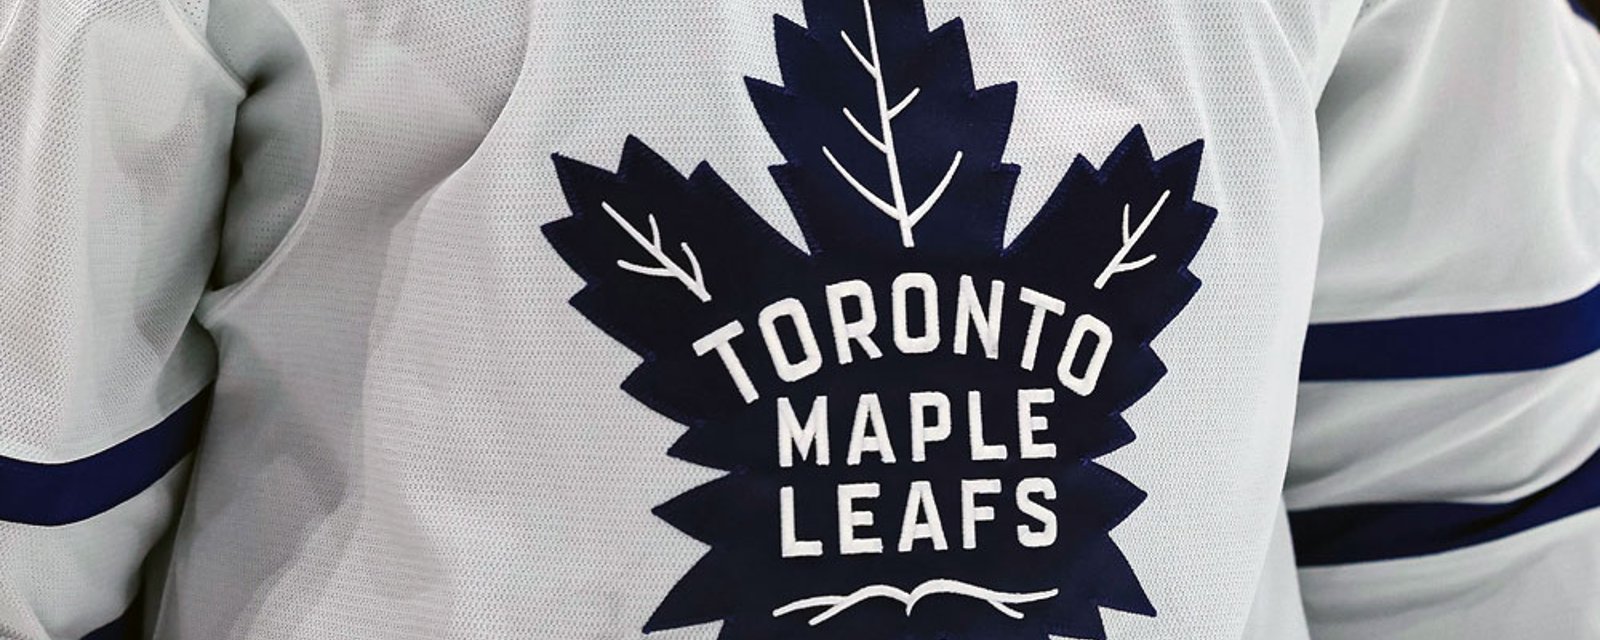 Reports that the Leafs are considering two contract buy-outs